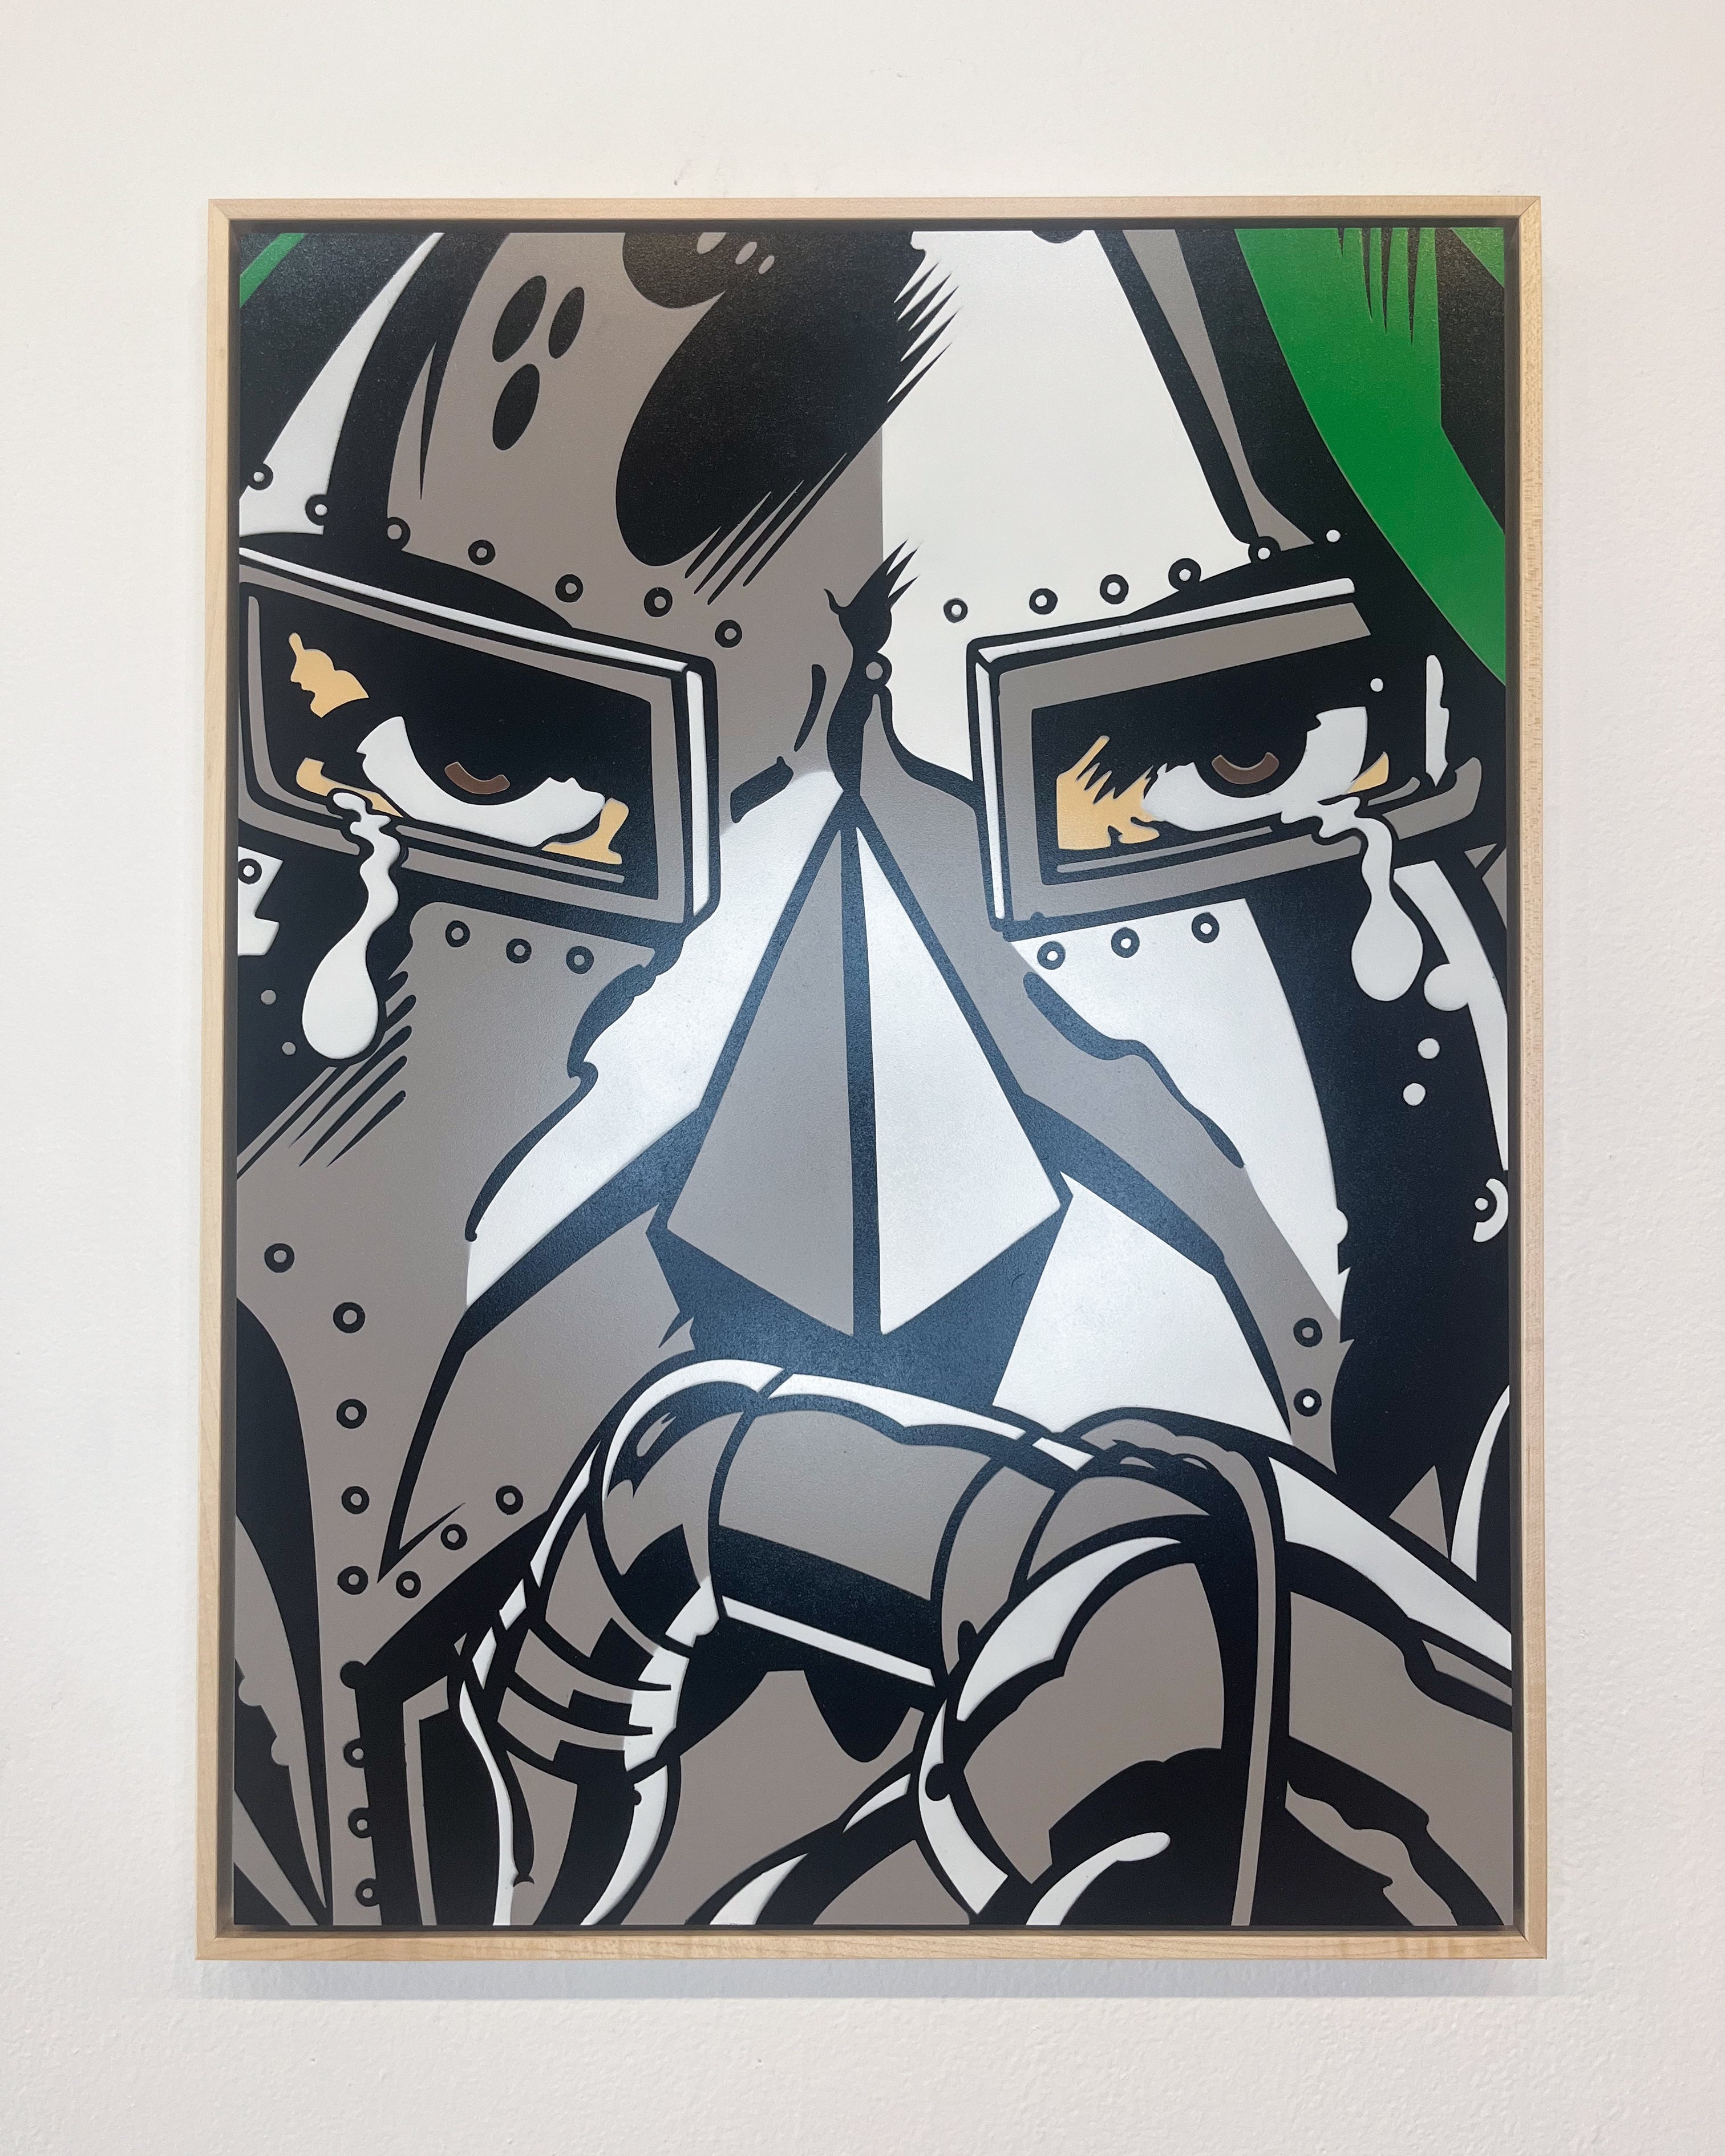 "Dr. Doom's Anguish" by R6D4